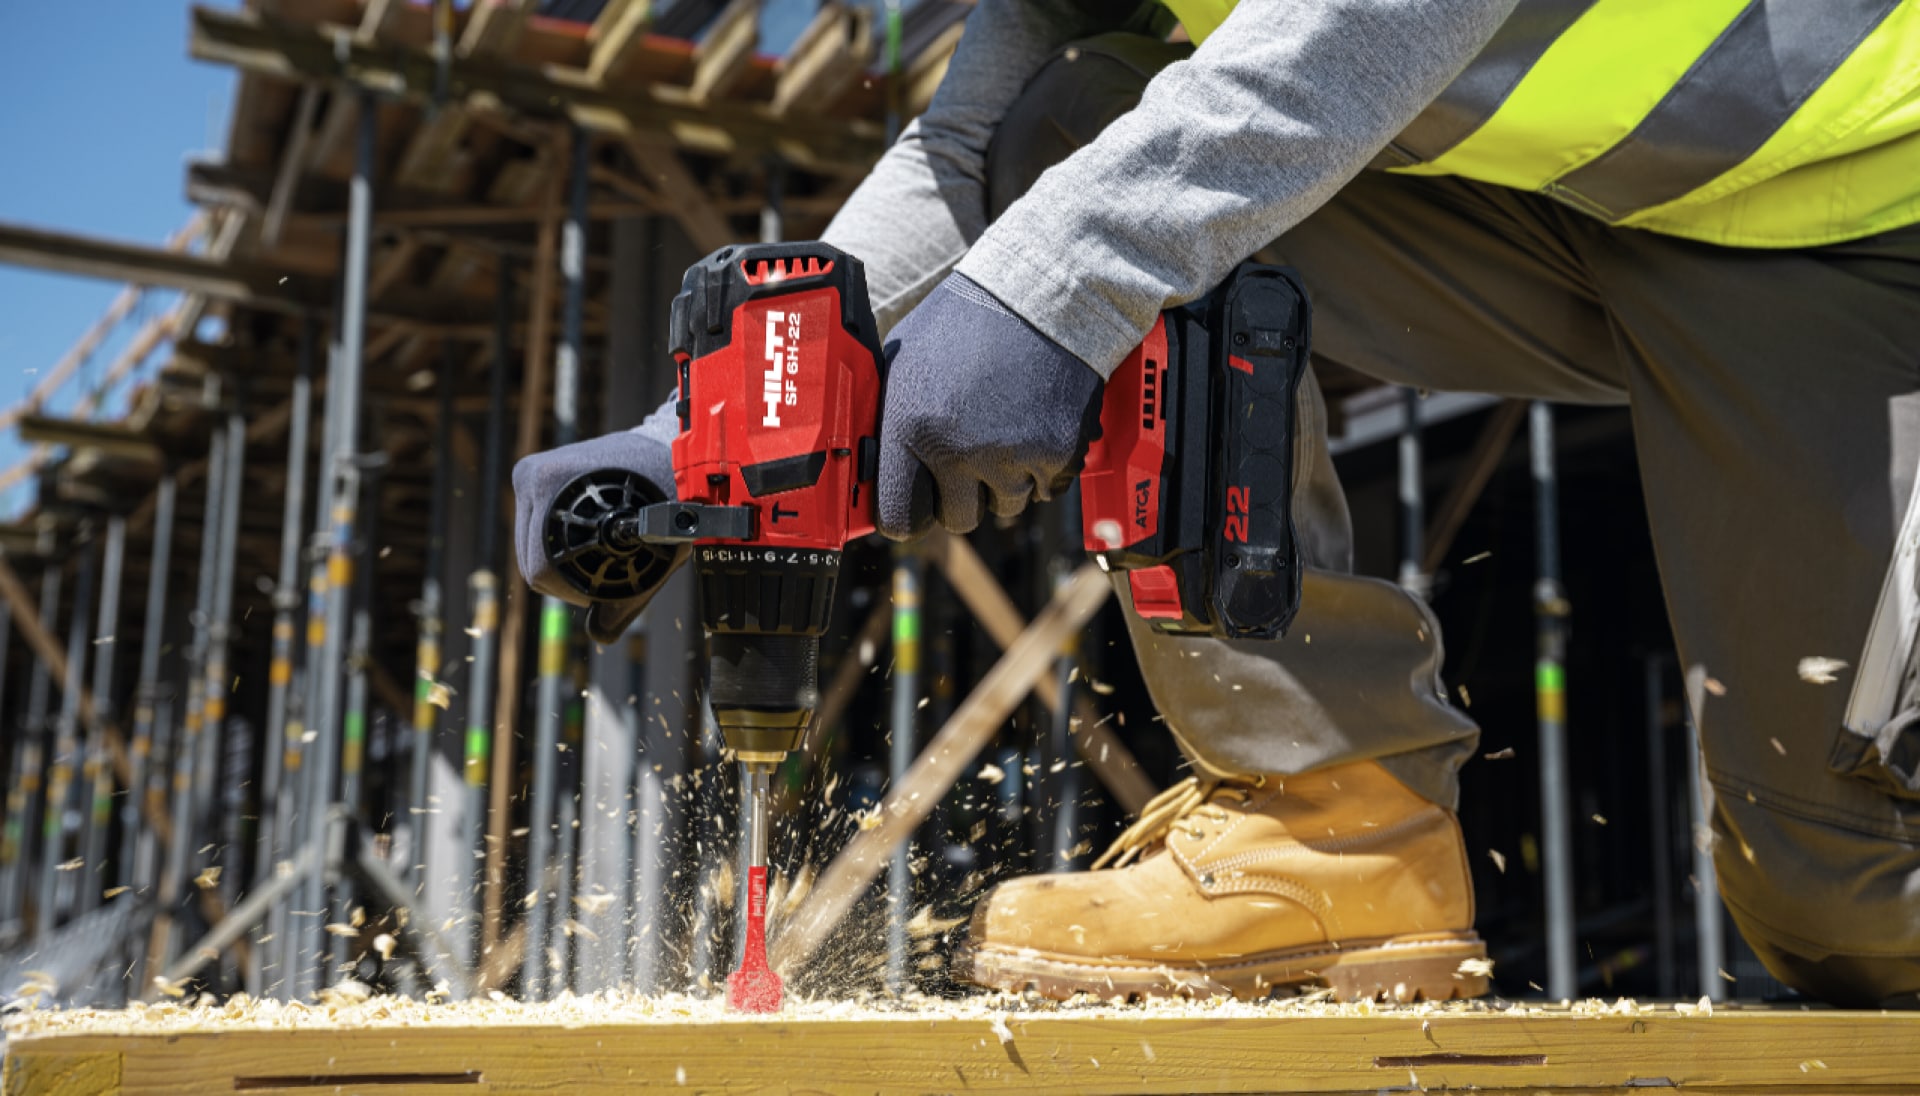 Worker using SF 6H-22 3rd generation Nuron cordless hammer drill driver with B22-85 battery and spade bit in wood